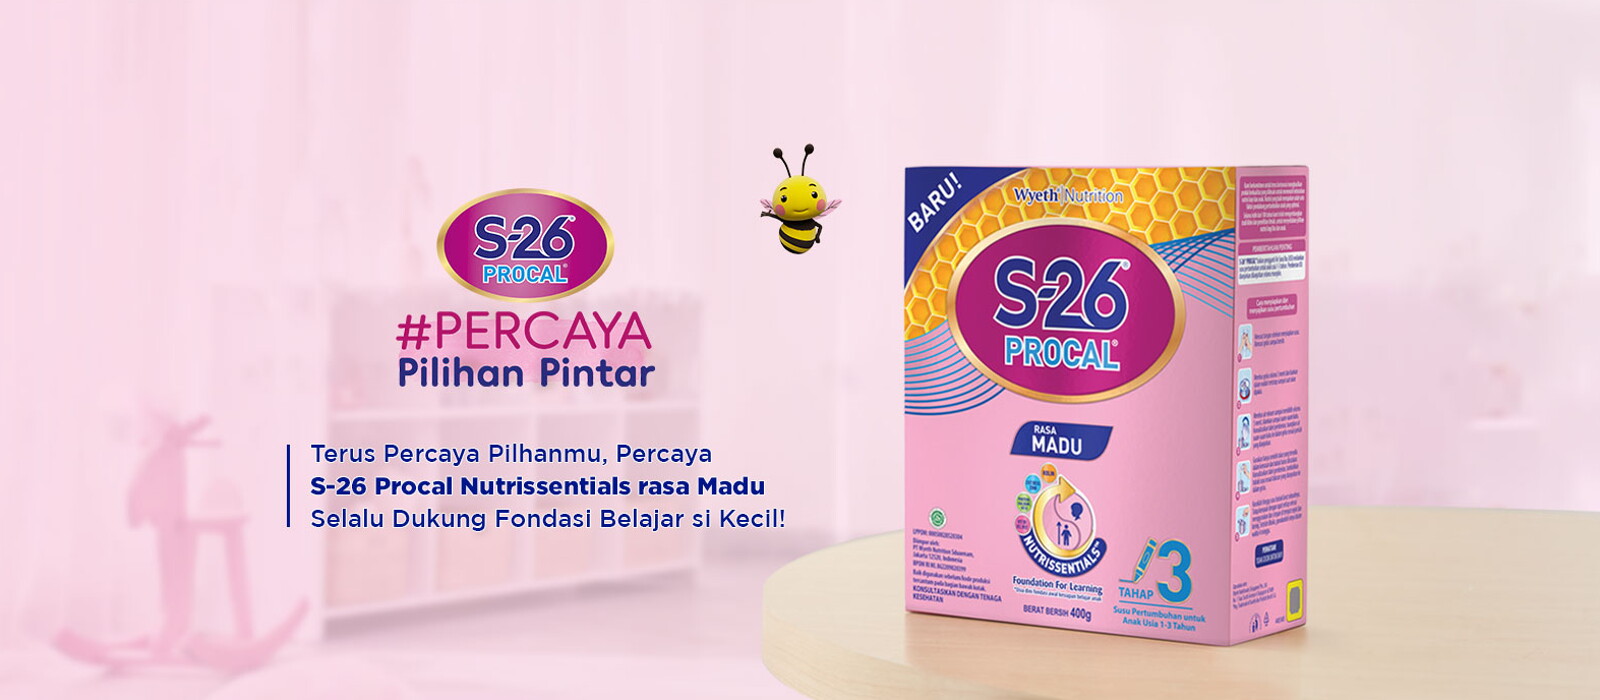 Product-Page-Honey_Banner_1600x700_revised.jpg